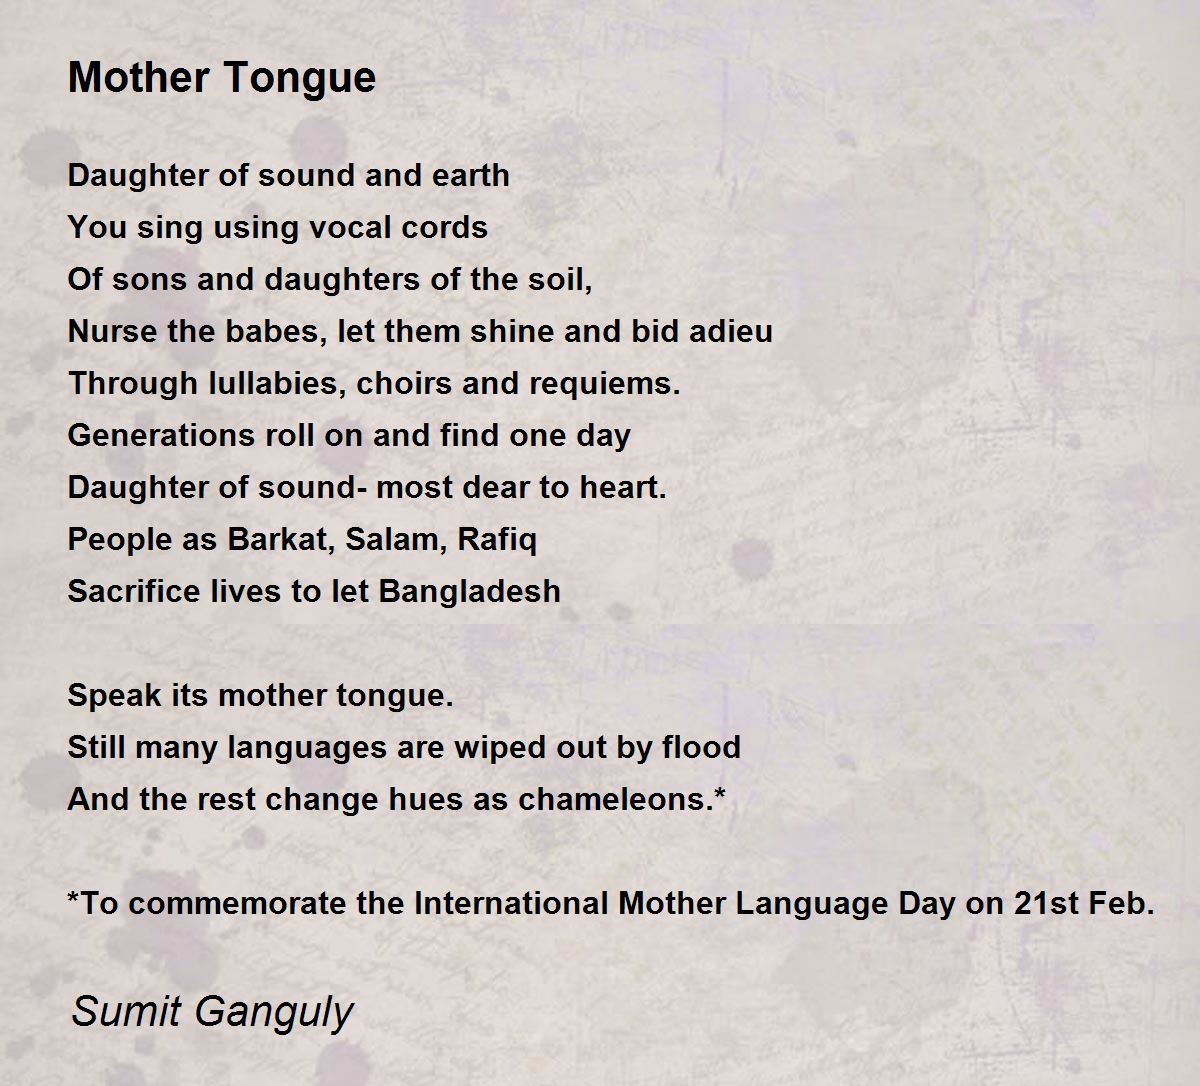 Mother Tongue by Sumit Ganguly - Mother Tongue Poem